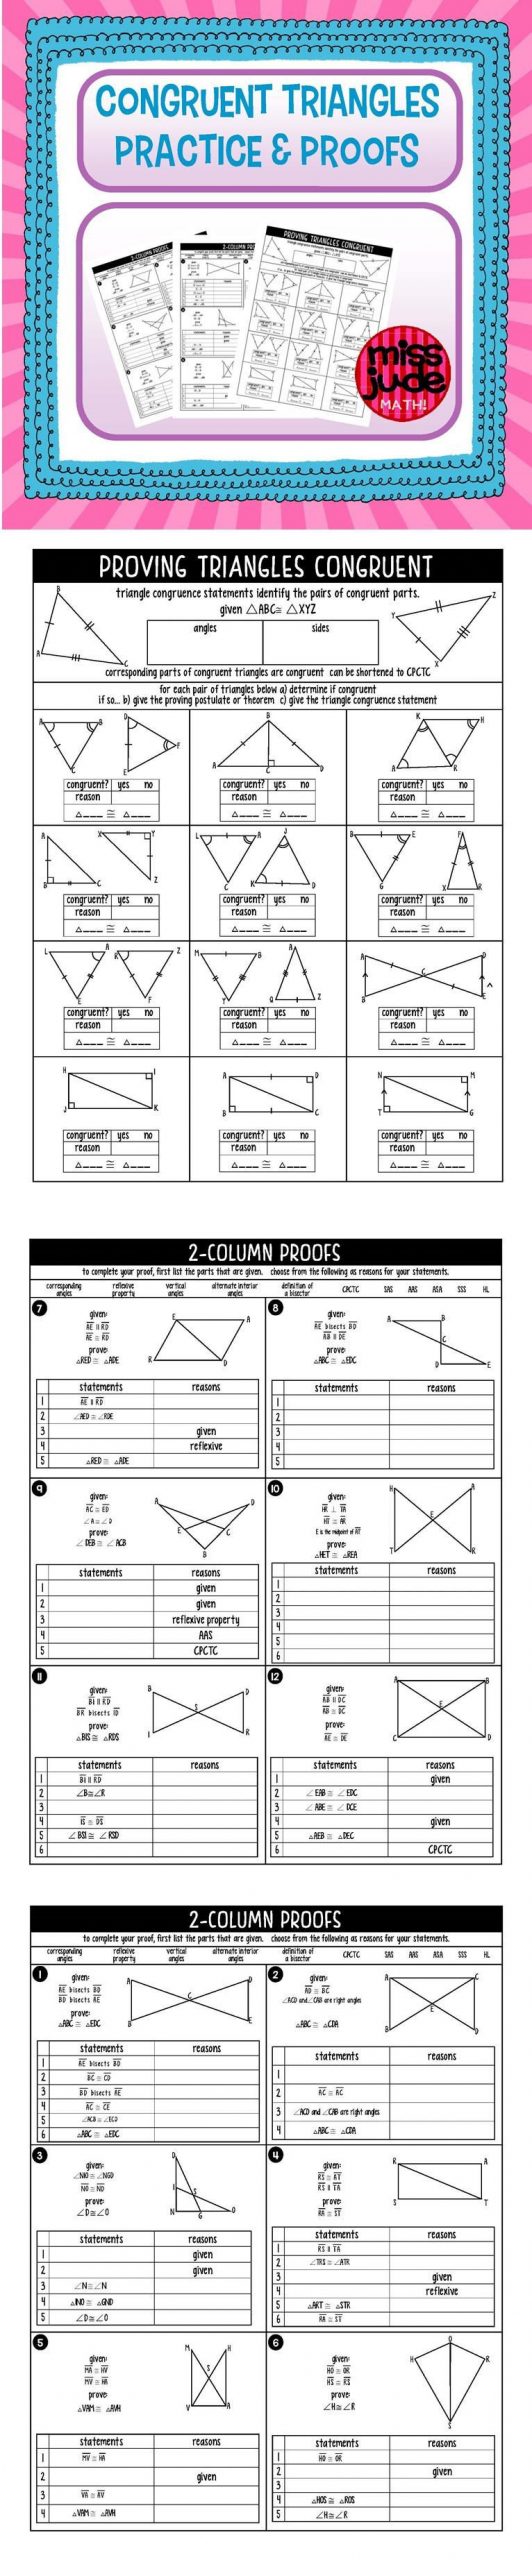 Triangle Congruence Practice Worksheet Congruent Triangles Practice and Proofs Geometry